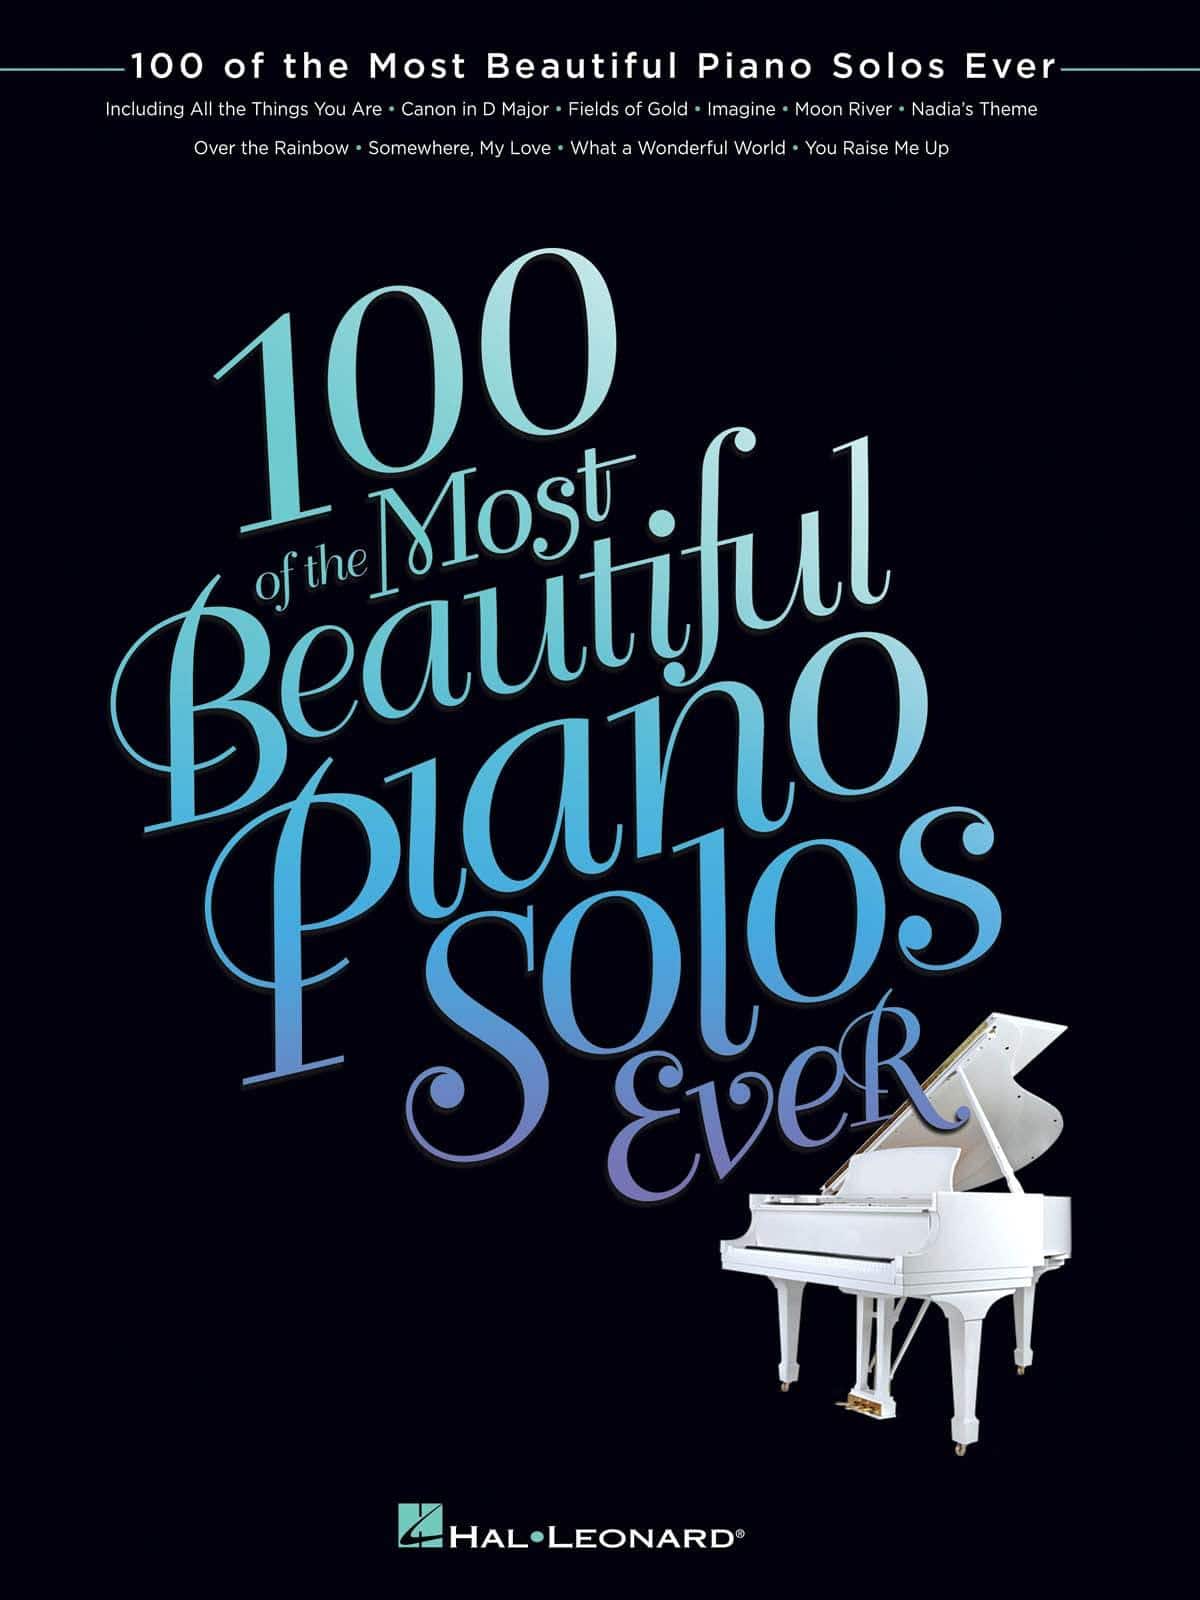 100 of the Most Beautiful Piano Solos Ever Book - SureShot Books Publishing LLC